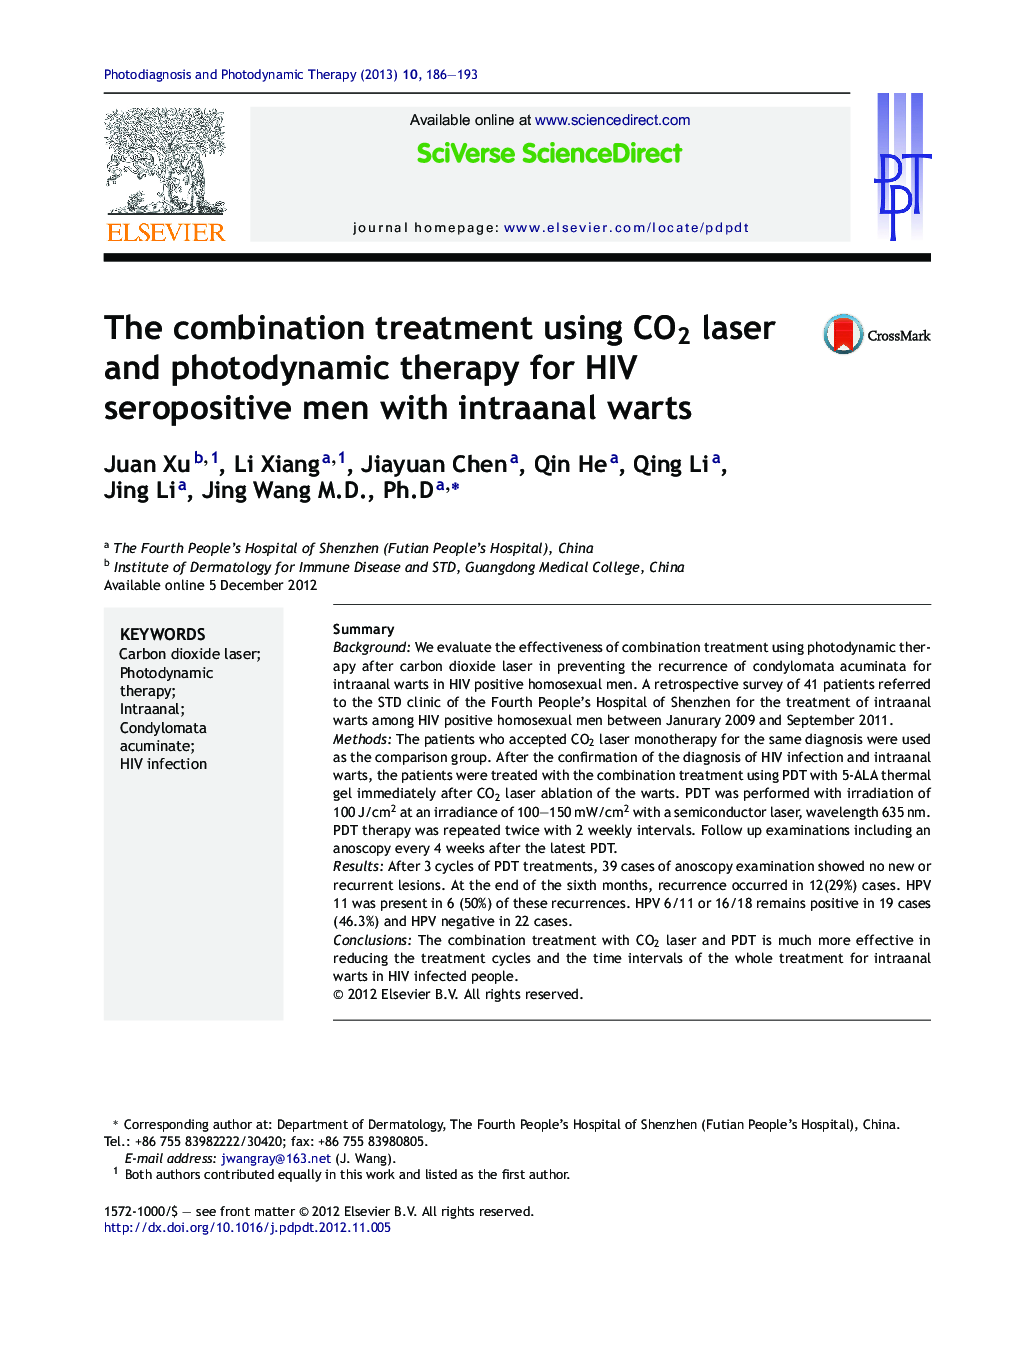 The combination treatment using CO2 laser and photodynamic therapy for HIV seropositive men with intraanal warts